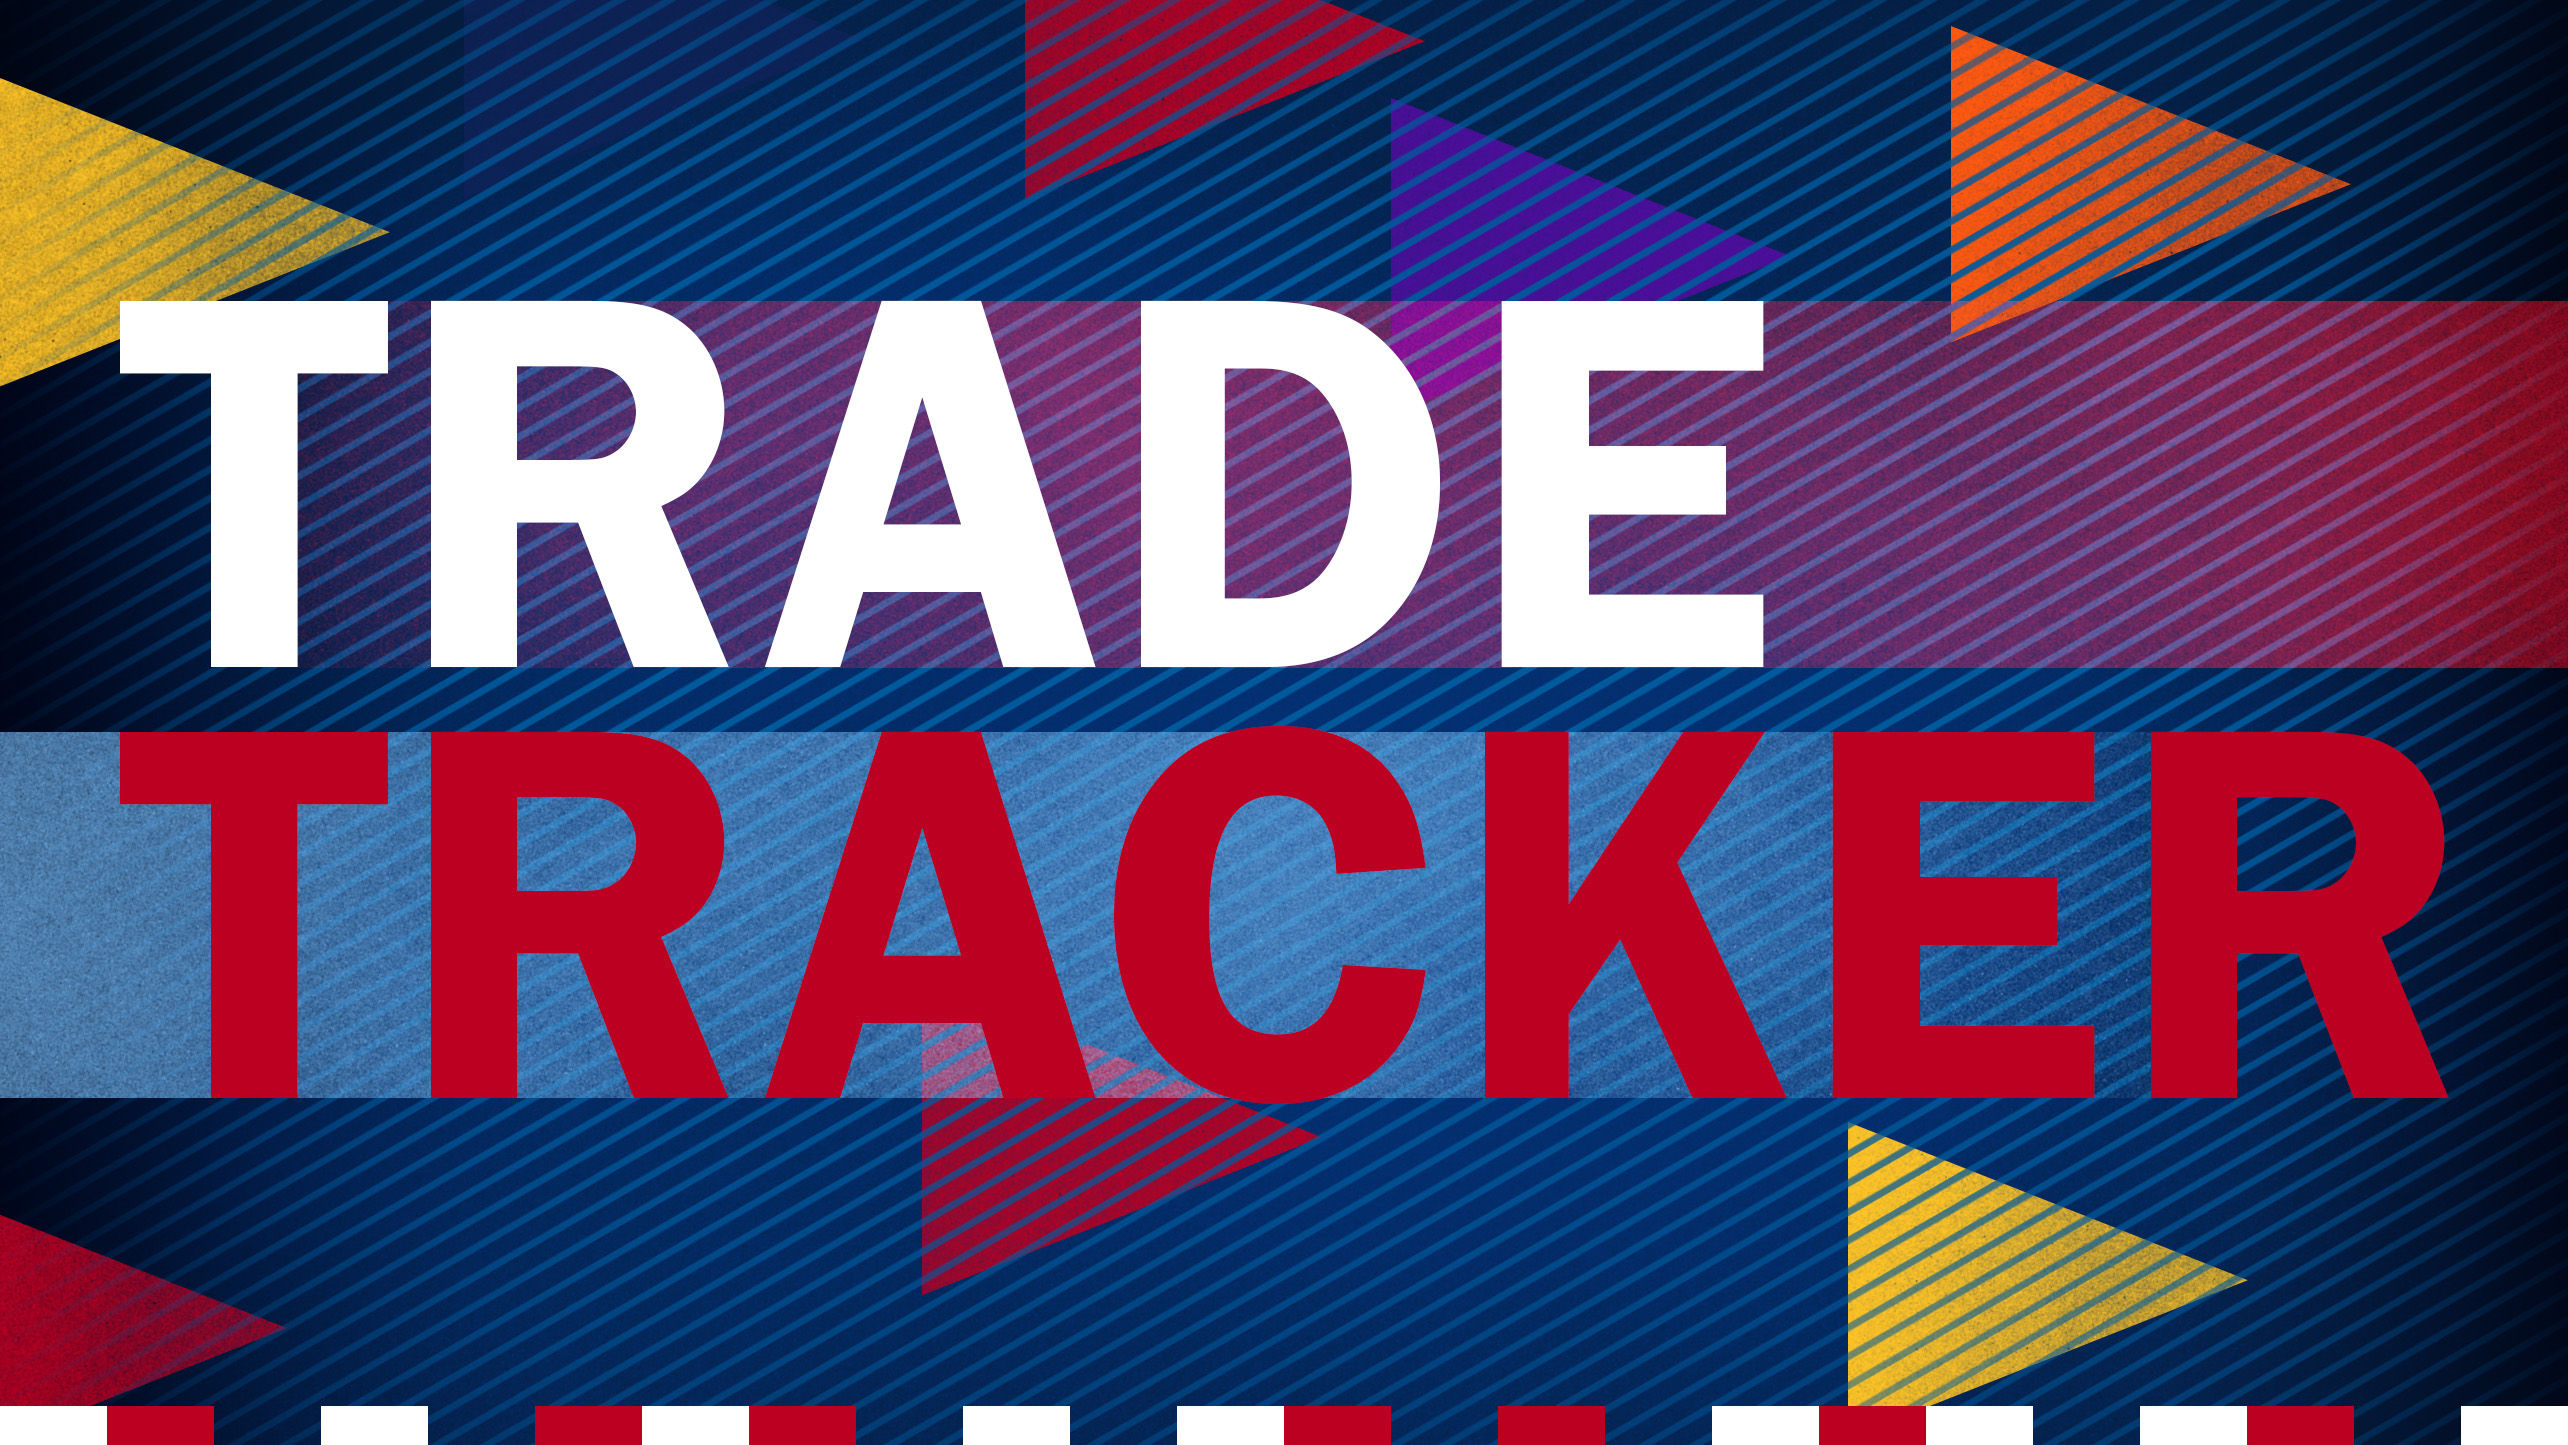 The words Trade Tracker with a colorful background